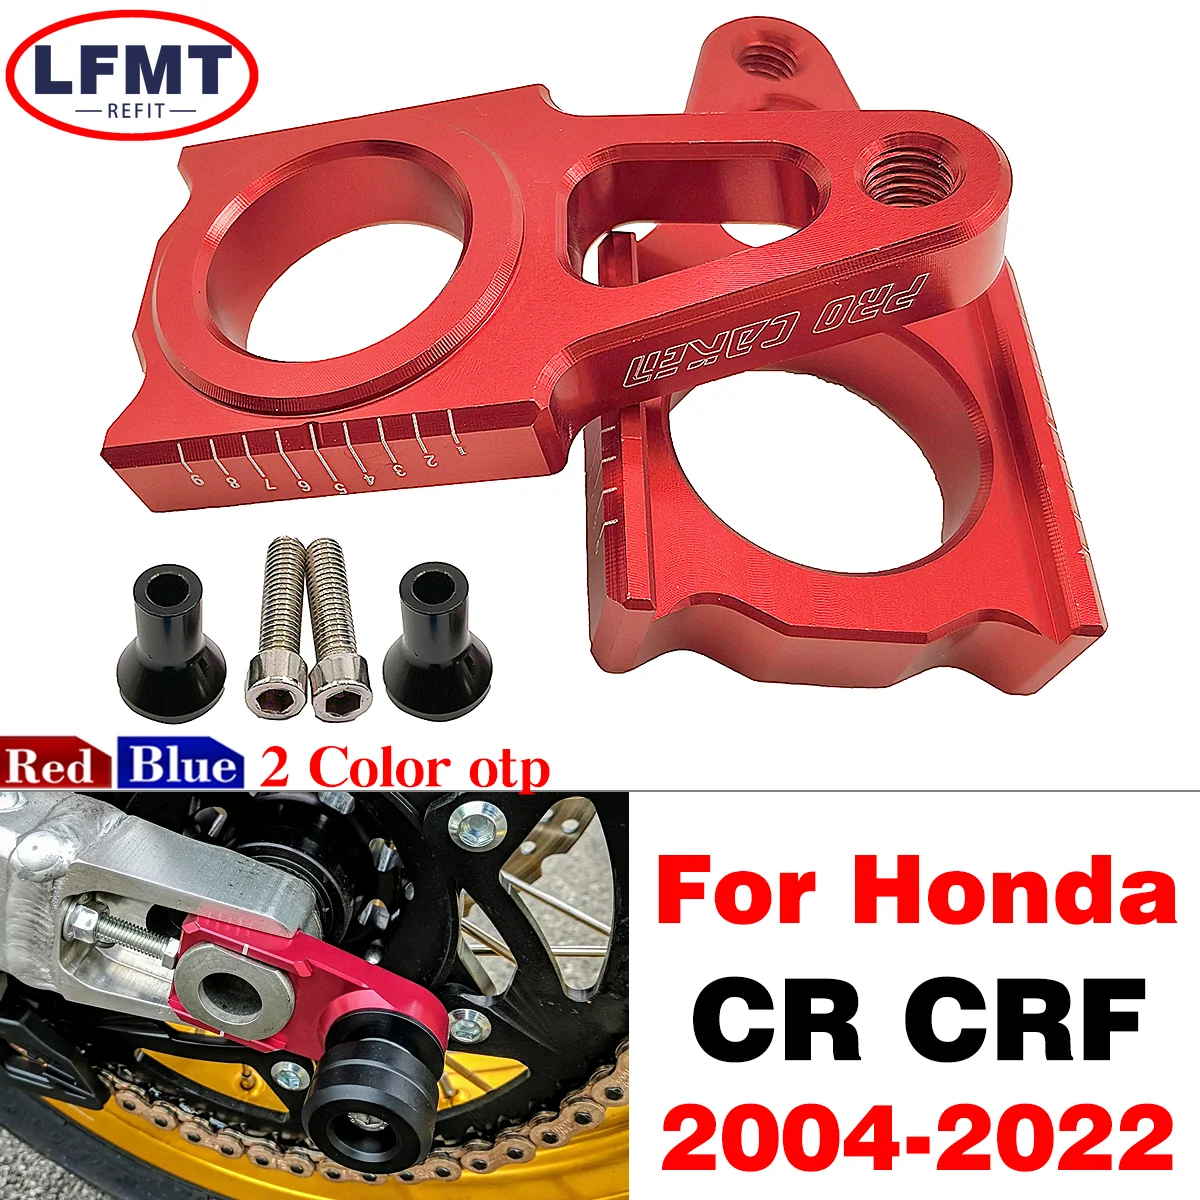 

Motorcycle CNC Rear Axle Block Chain Adjuster For HONDA CRF250RX CRF450RX CRF250R CRF450R CRF250X CRF450X CR 125 250 CRF X R RX